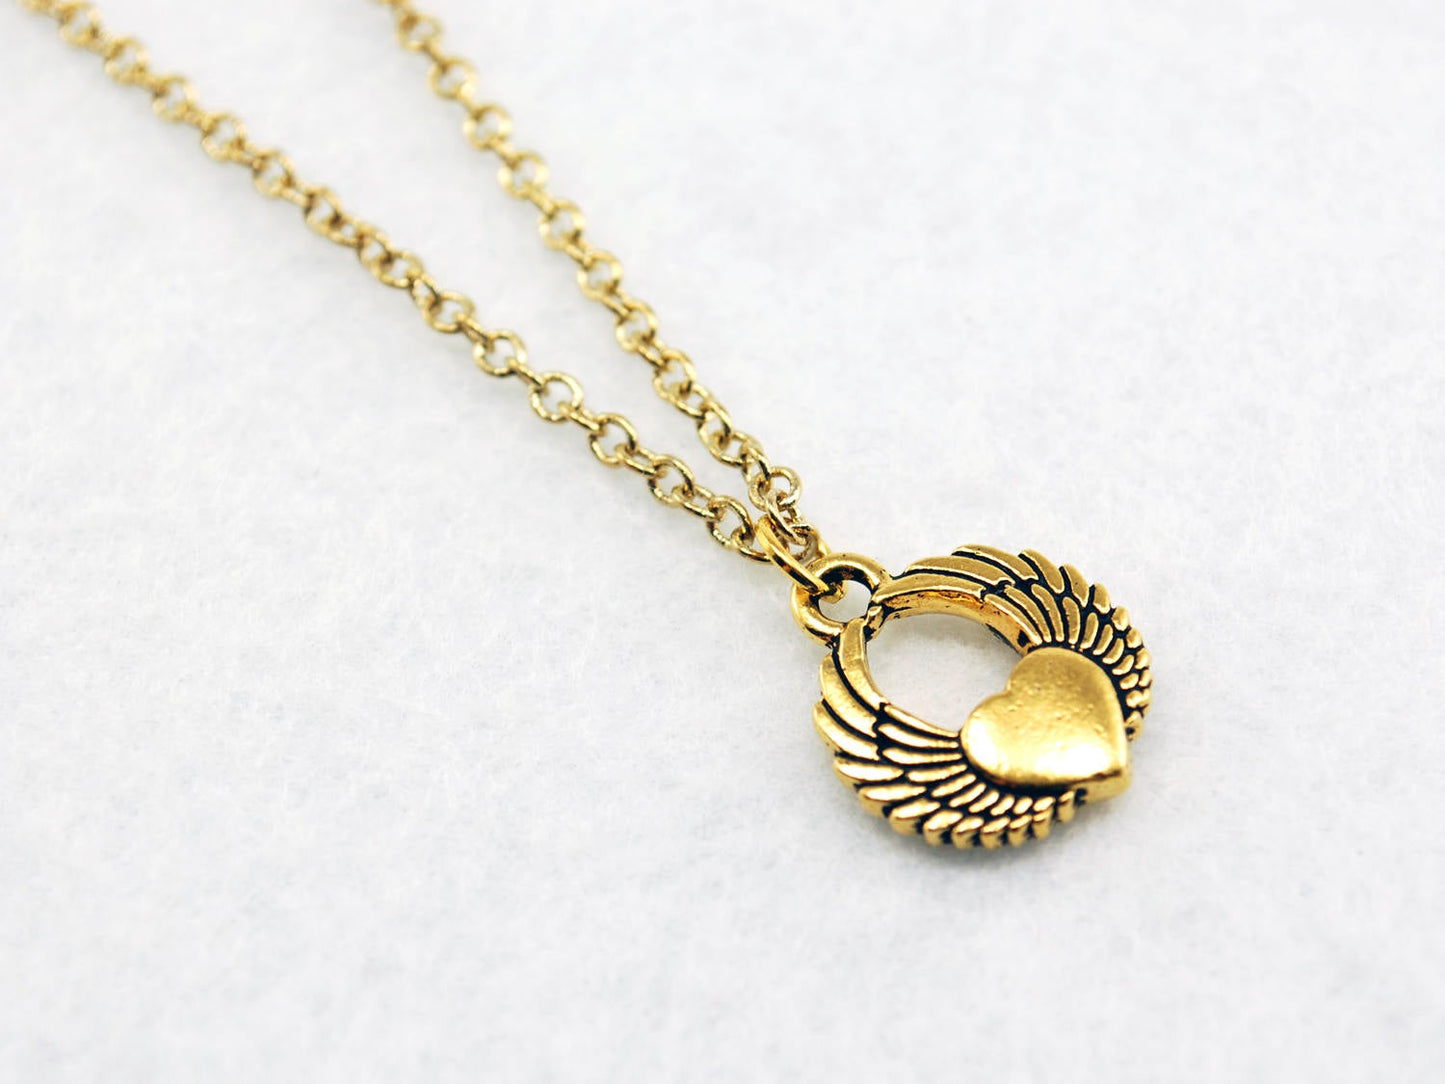 Winged Heart Necklace in Gold